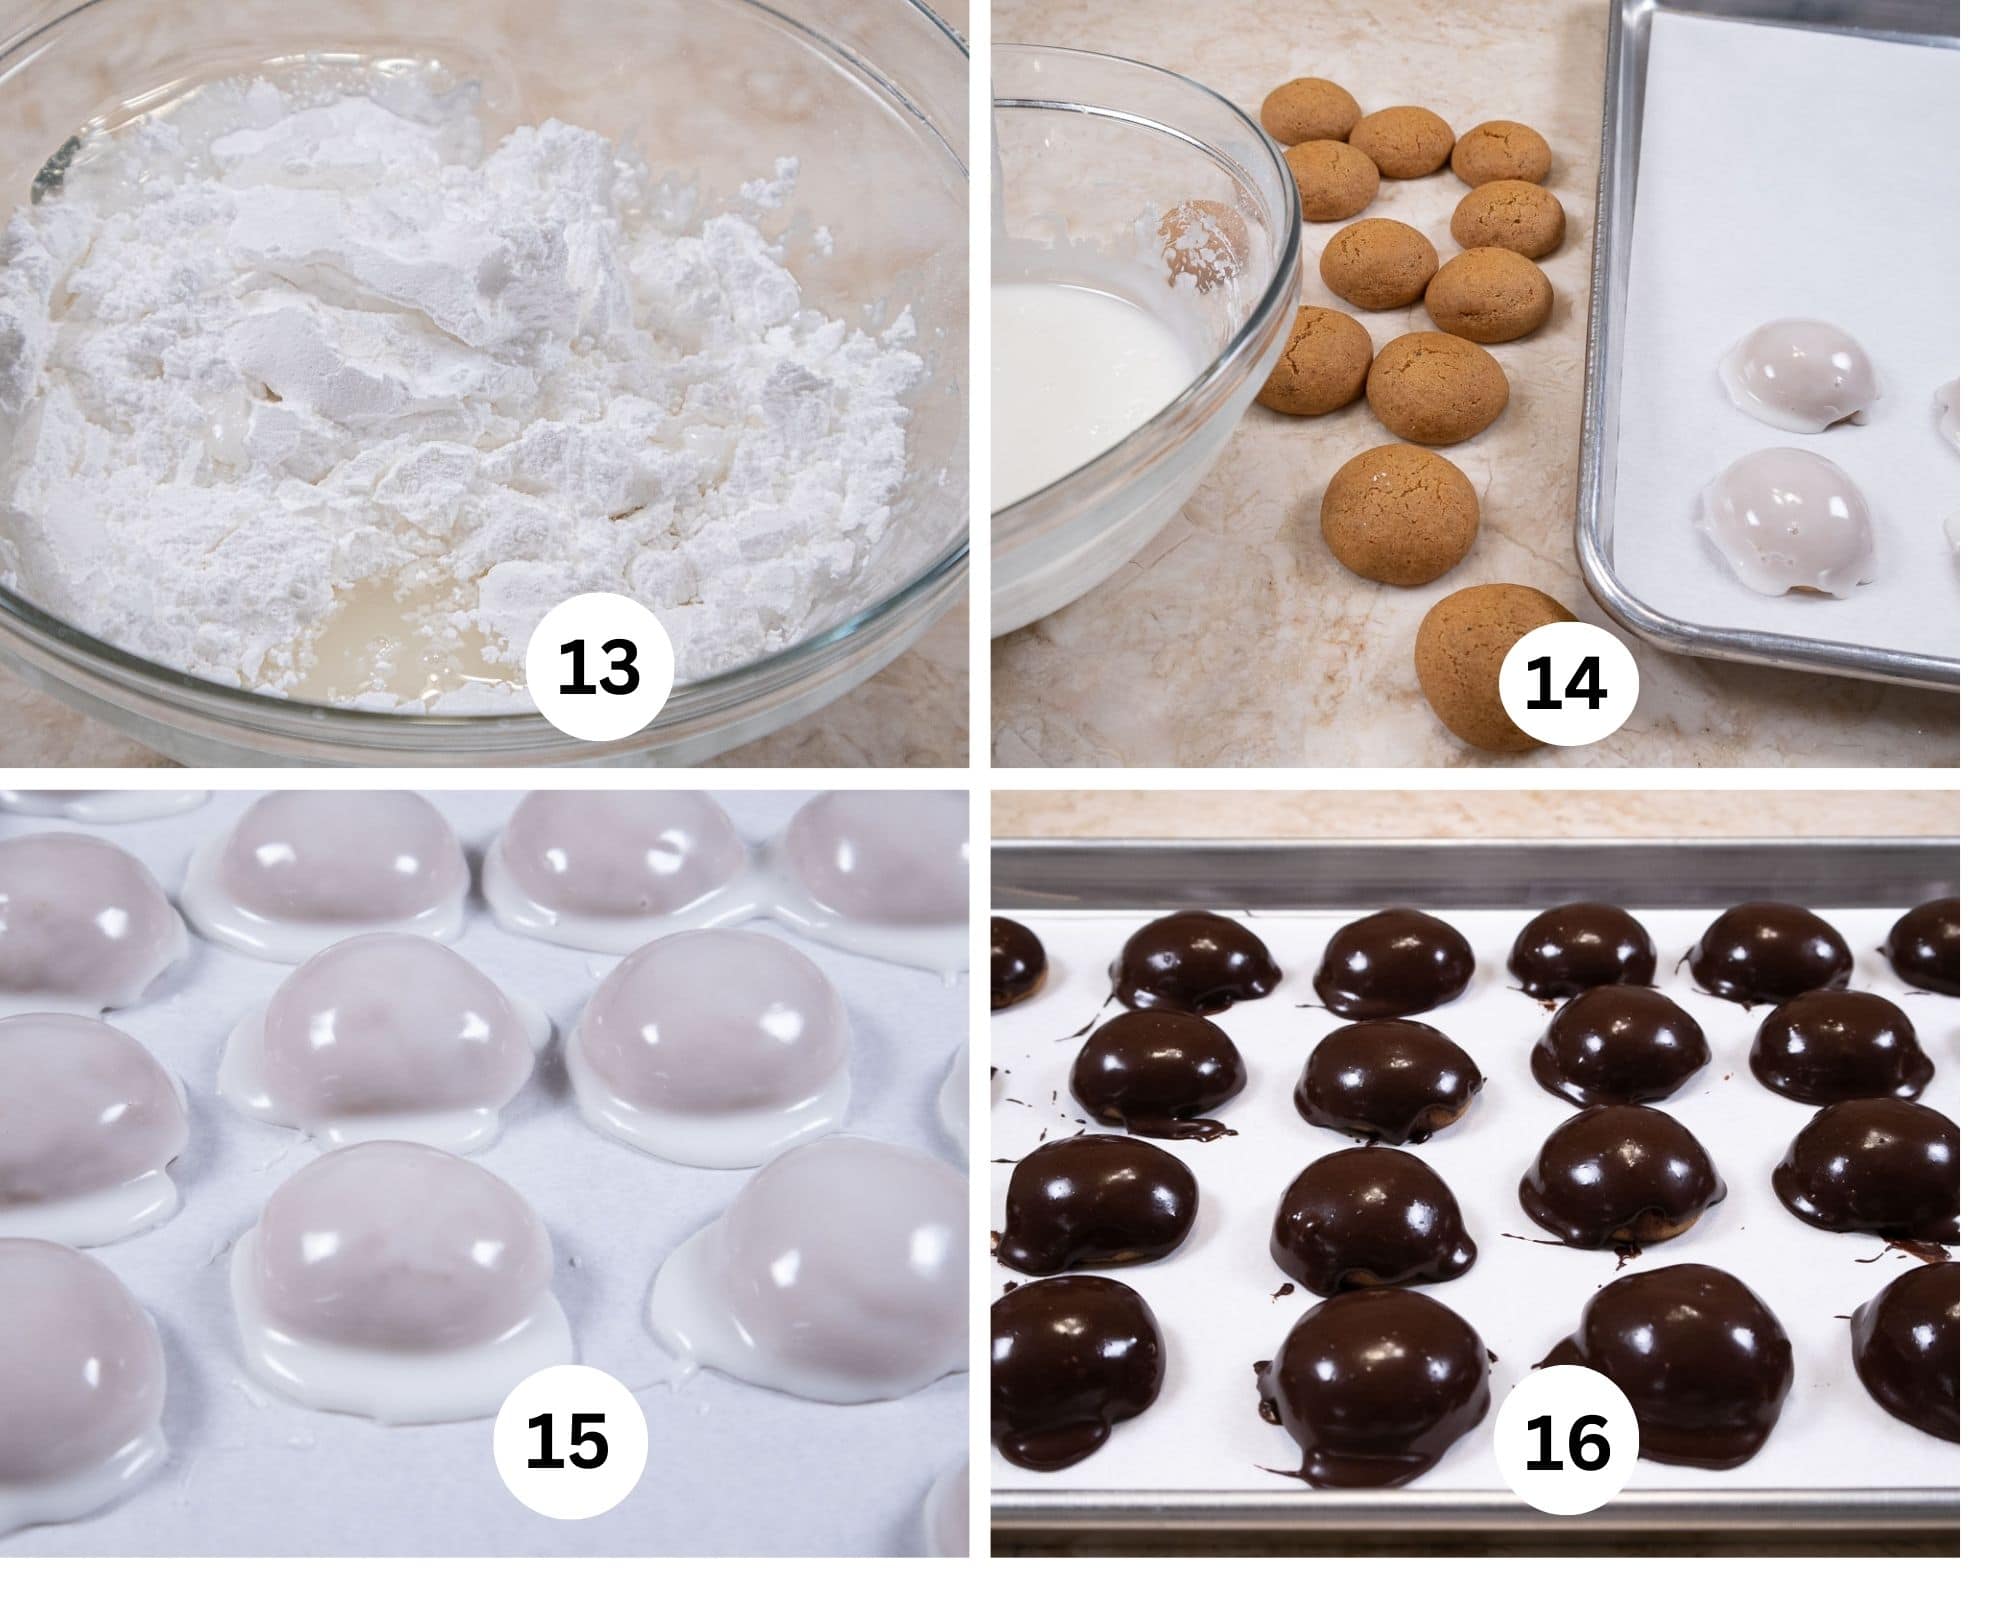 The final collage shows the glaze ingredients in a bowl, the glazing set up, the cookies glazed in white and in chocolate.